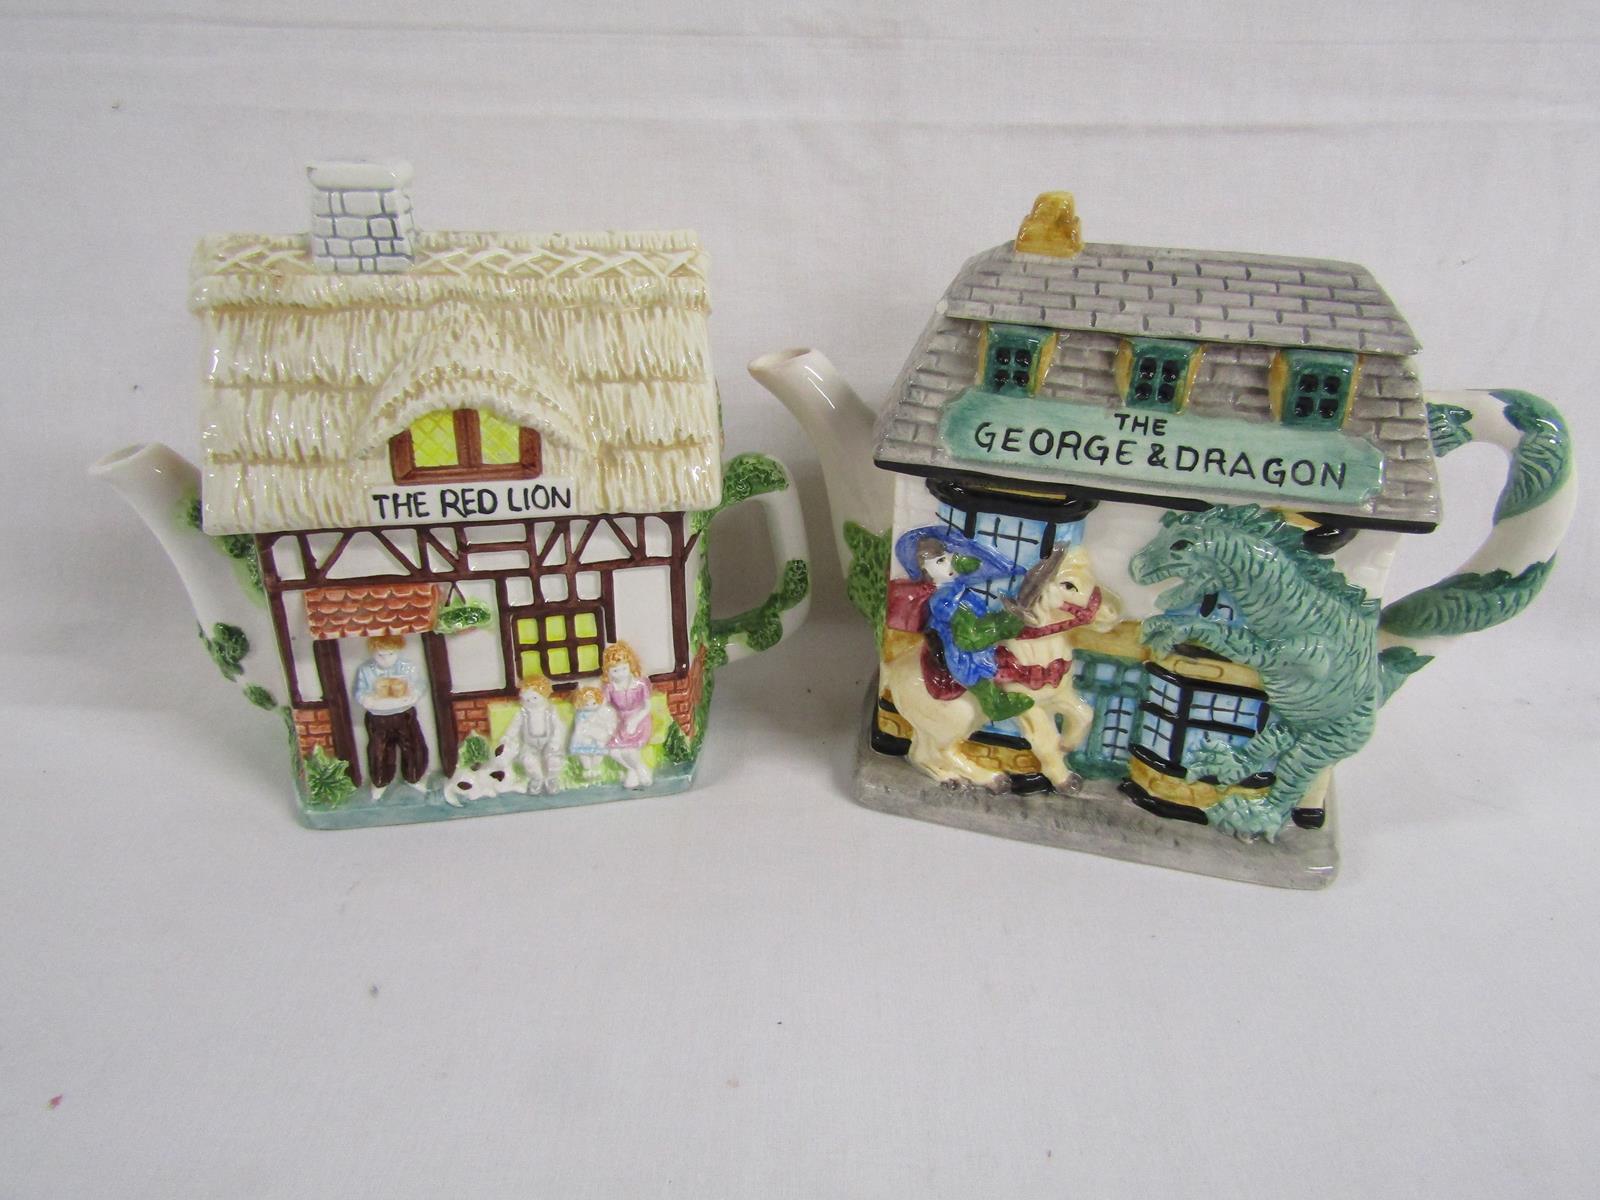 11 teapots include George and the Dragon and Red lion pub, butcher, Anne Hathaway's cottage, - Image 5 of 7